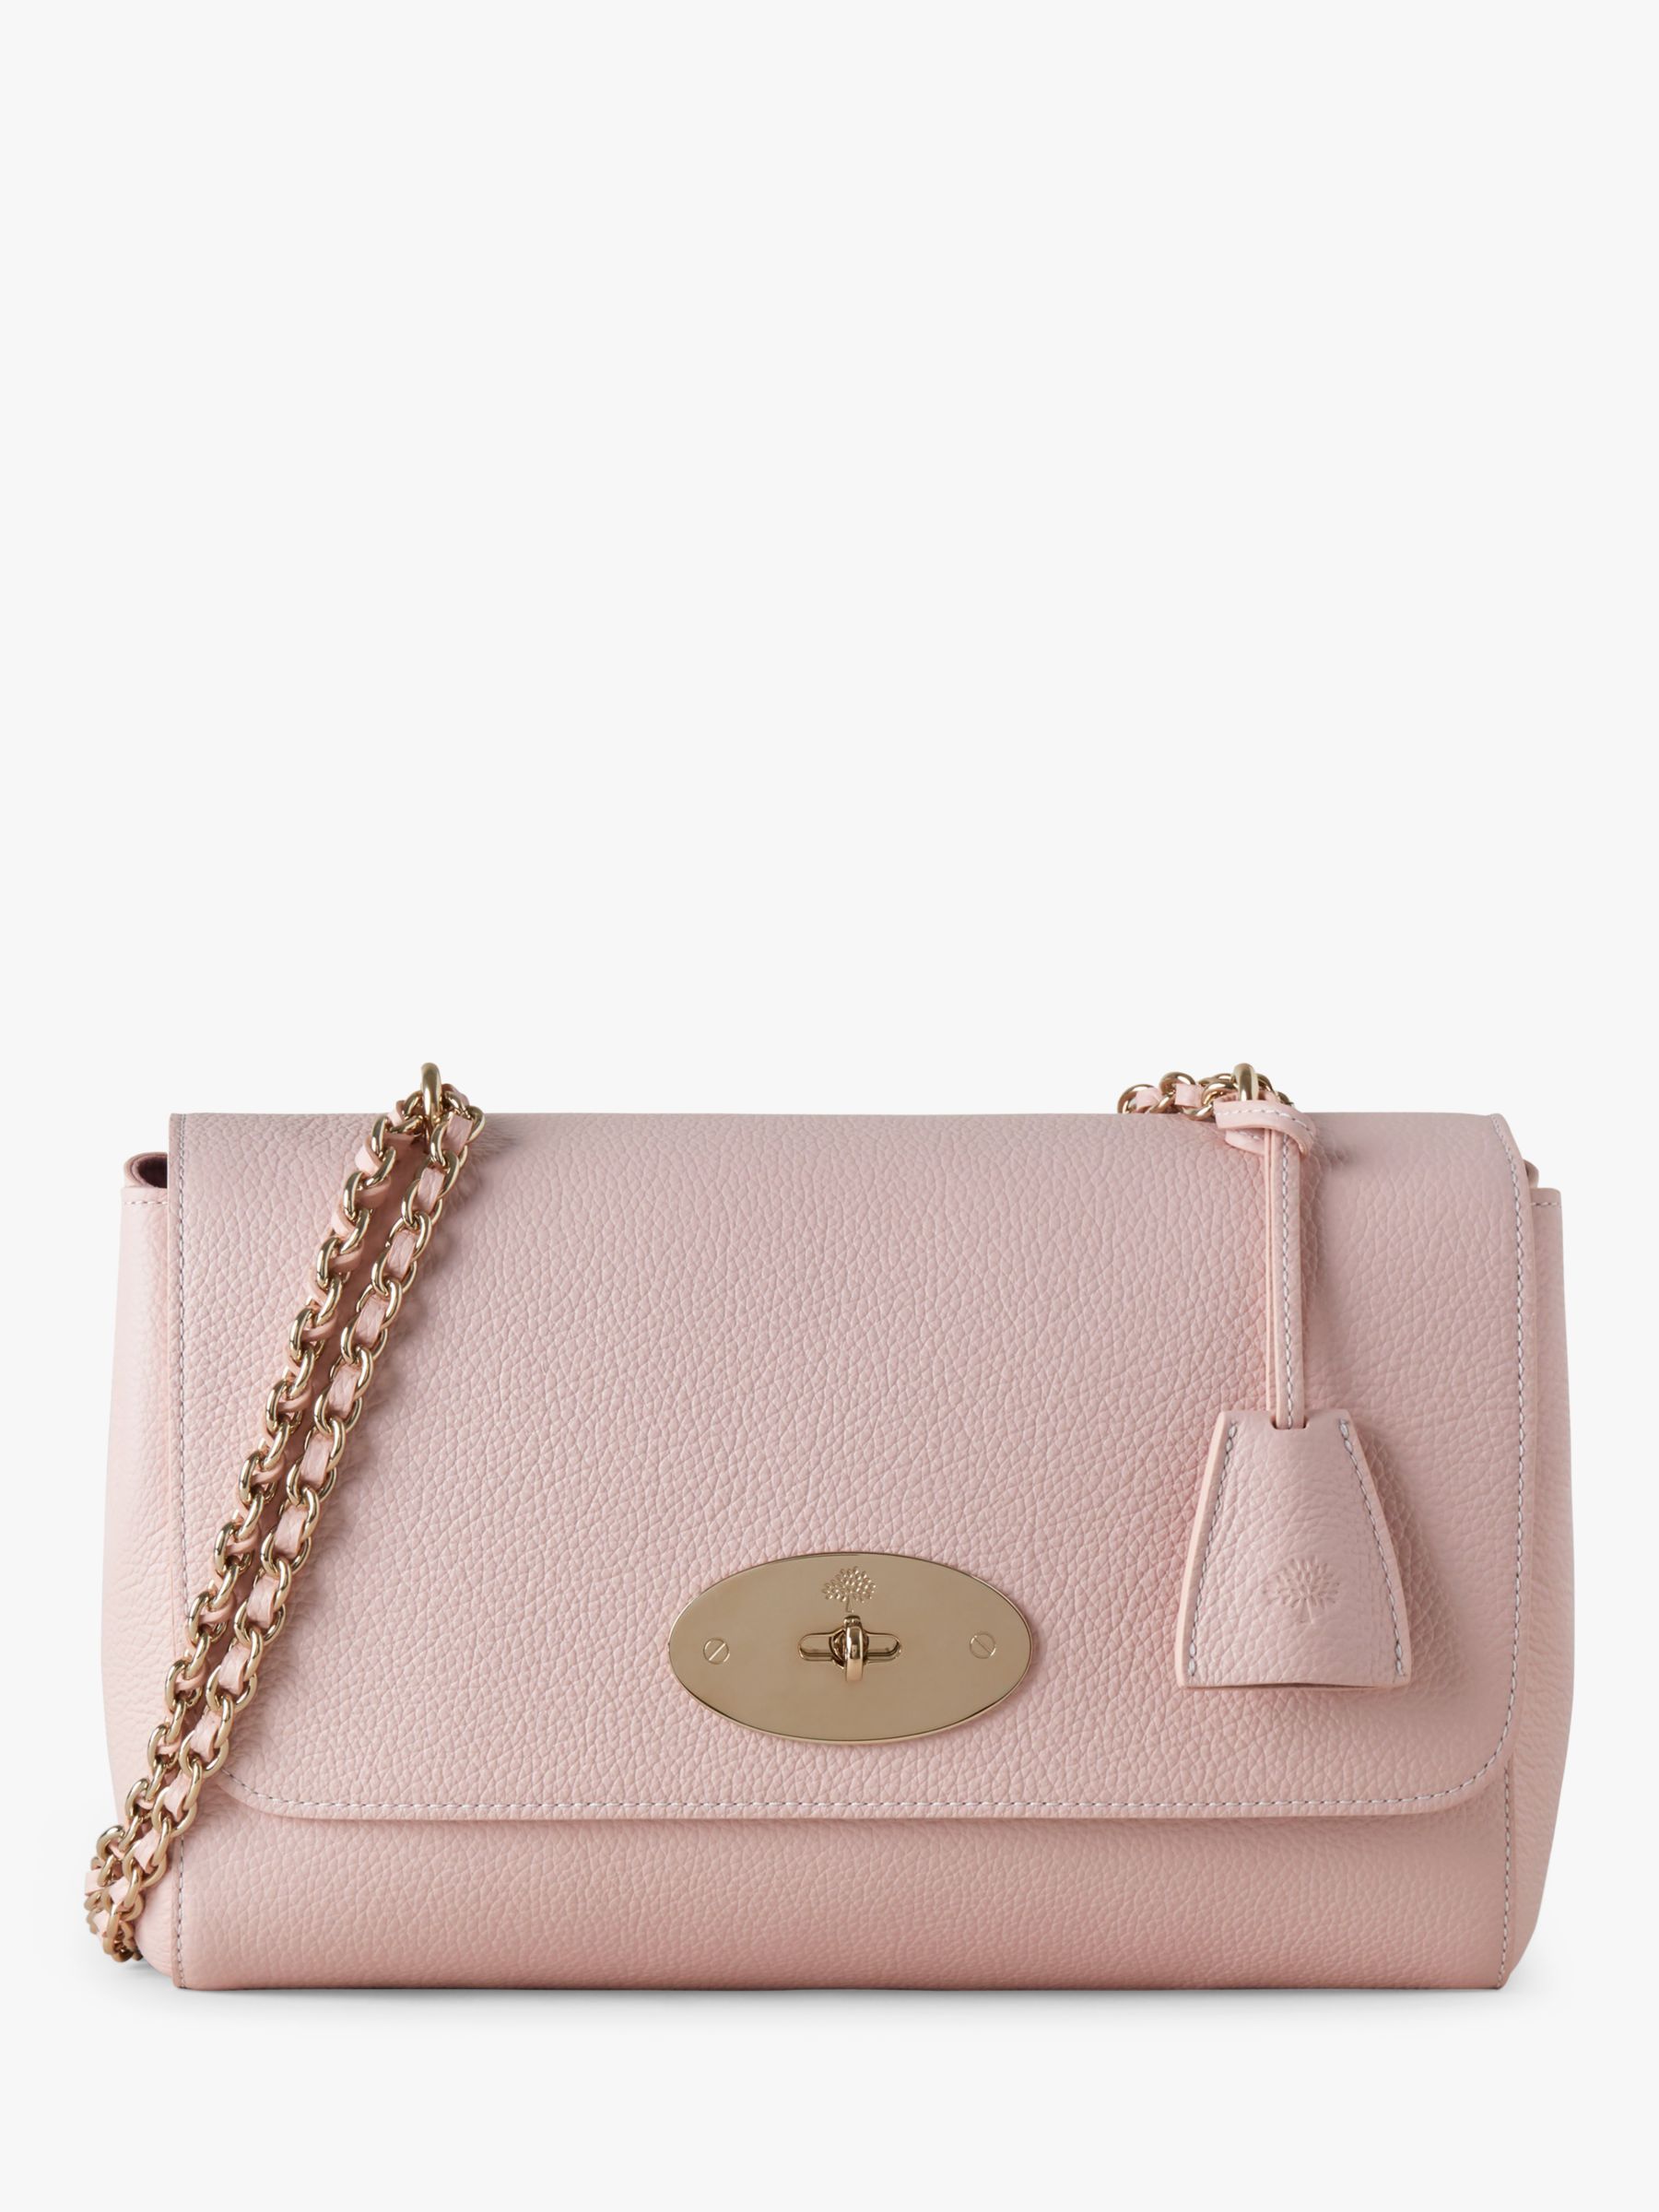 Mulberry Medium Lily Classic Grain Leather Shoulder Bag, Icy Pink at ...